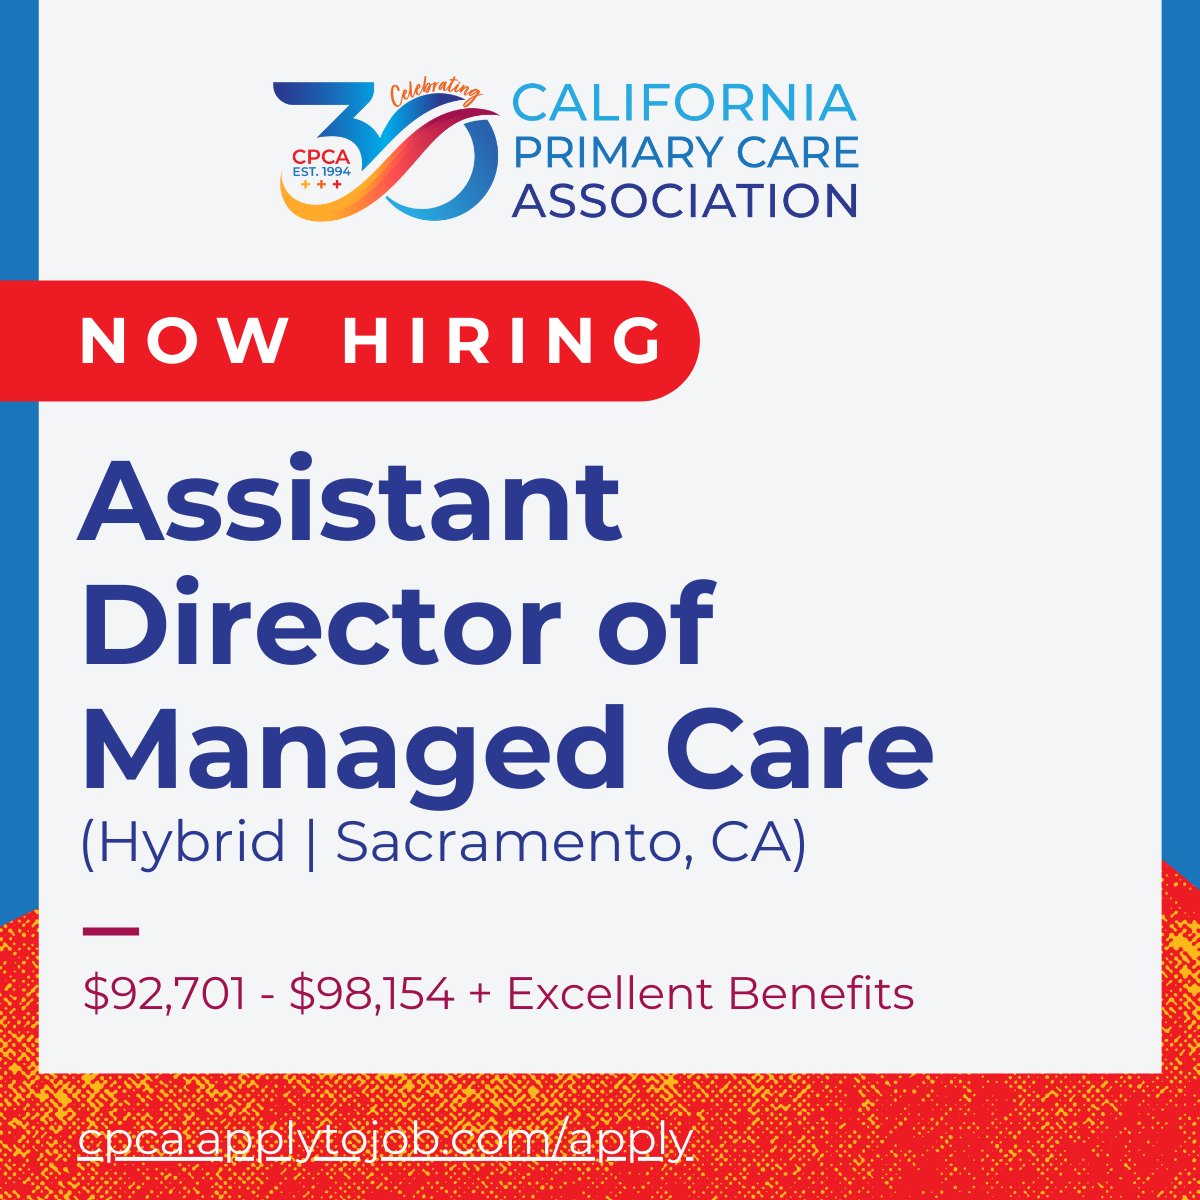 Are you passionate about health care and have experience in managed care? CPCA is hiring an Assistant Director of Managed Care and wants to hear from you! Job details below! ow.ly/GGvk50RwlBE